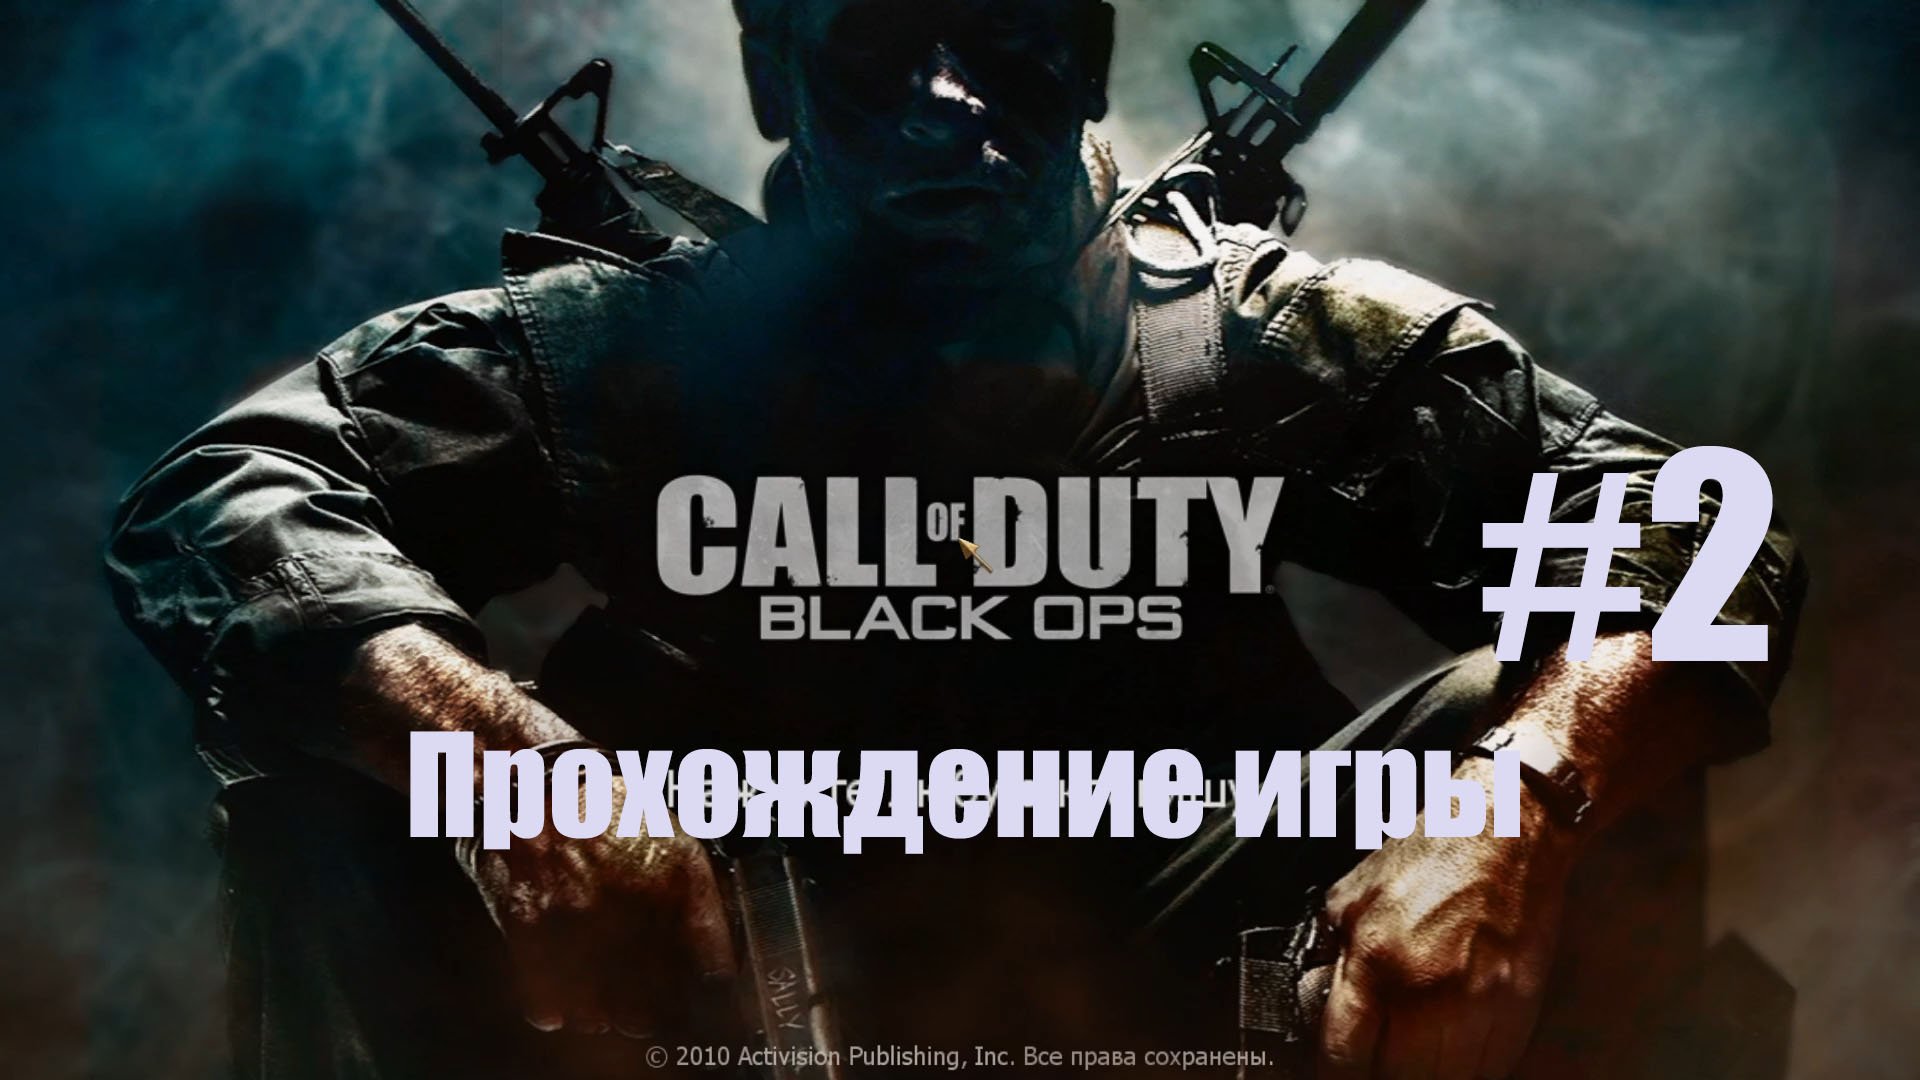 Call of Duty Black Ops #2